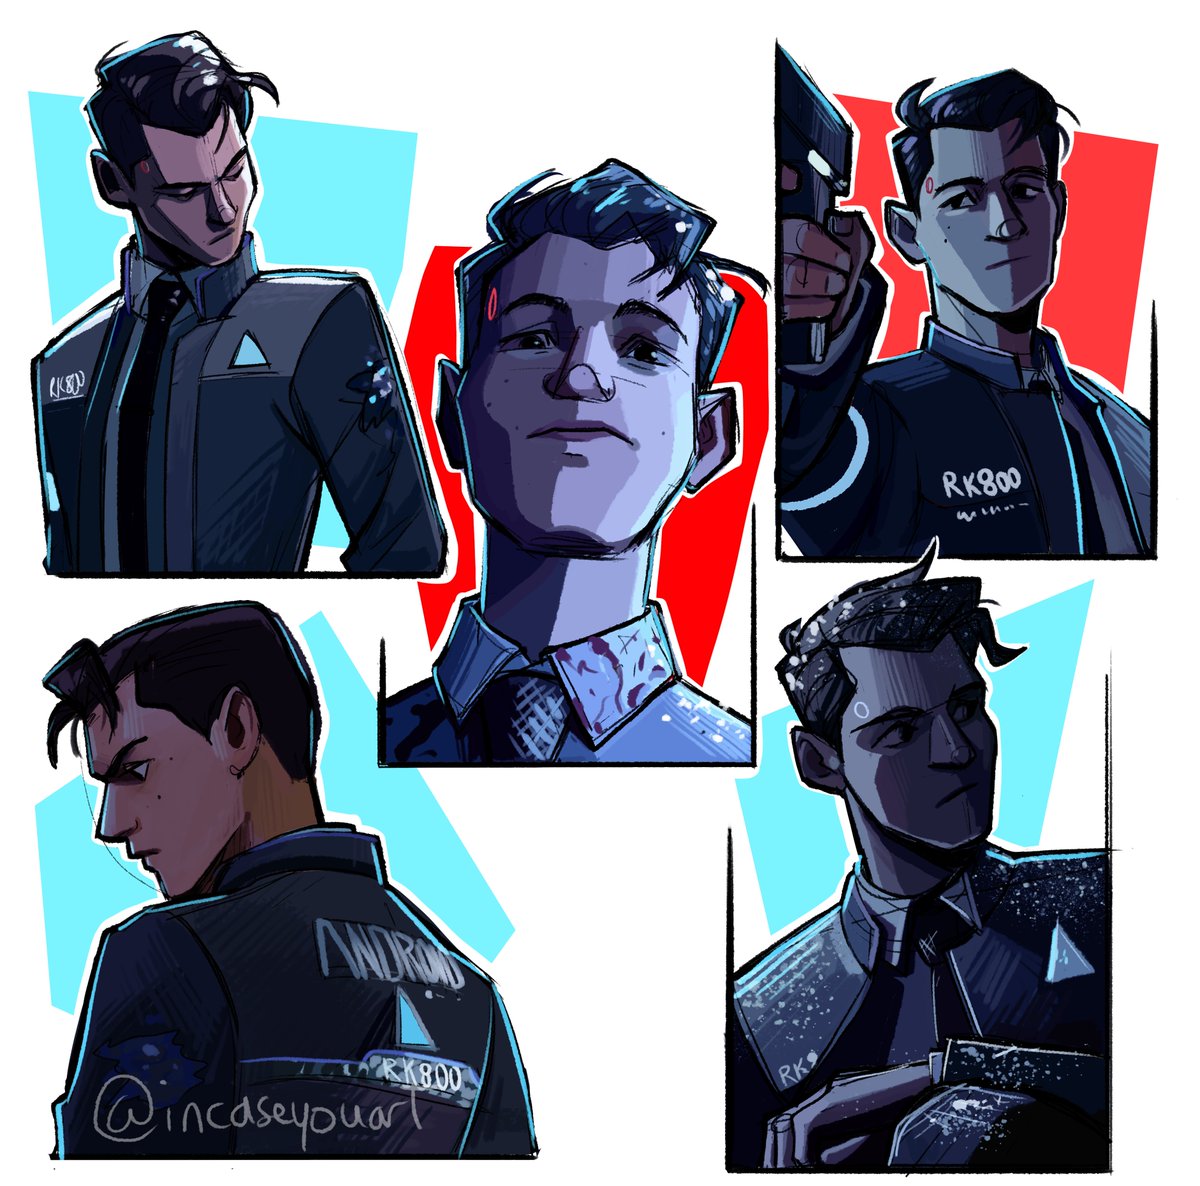 All the Connors I drew during my 2 hour stream! Speedrunning art is really fun lol

#connorarmy #dbh #detroitbecomehuman #dechartgames